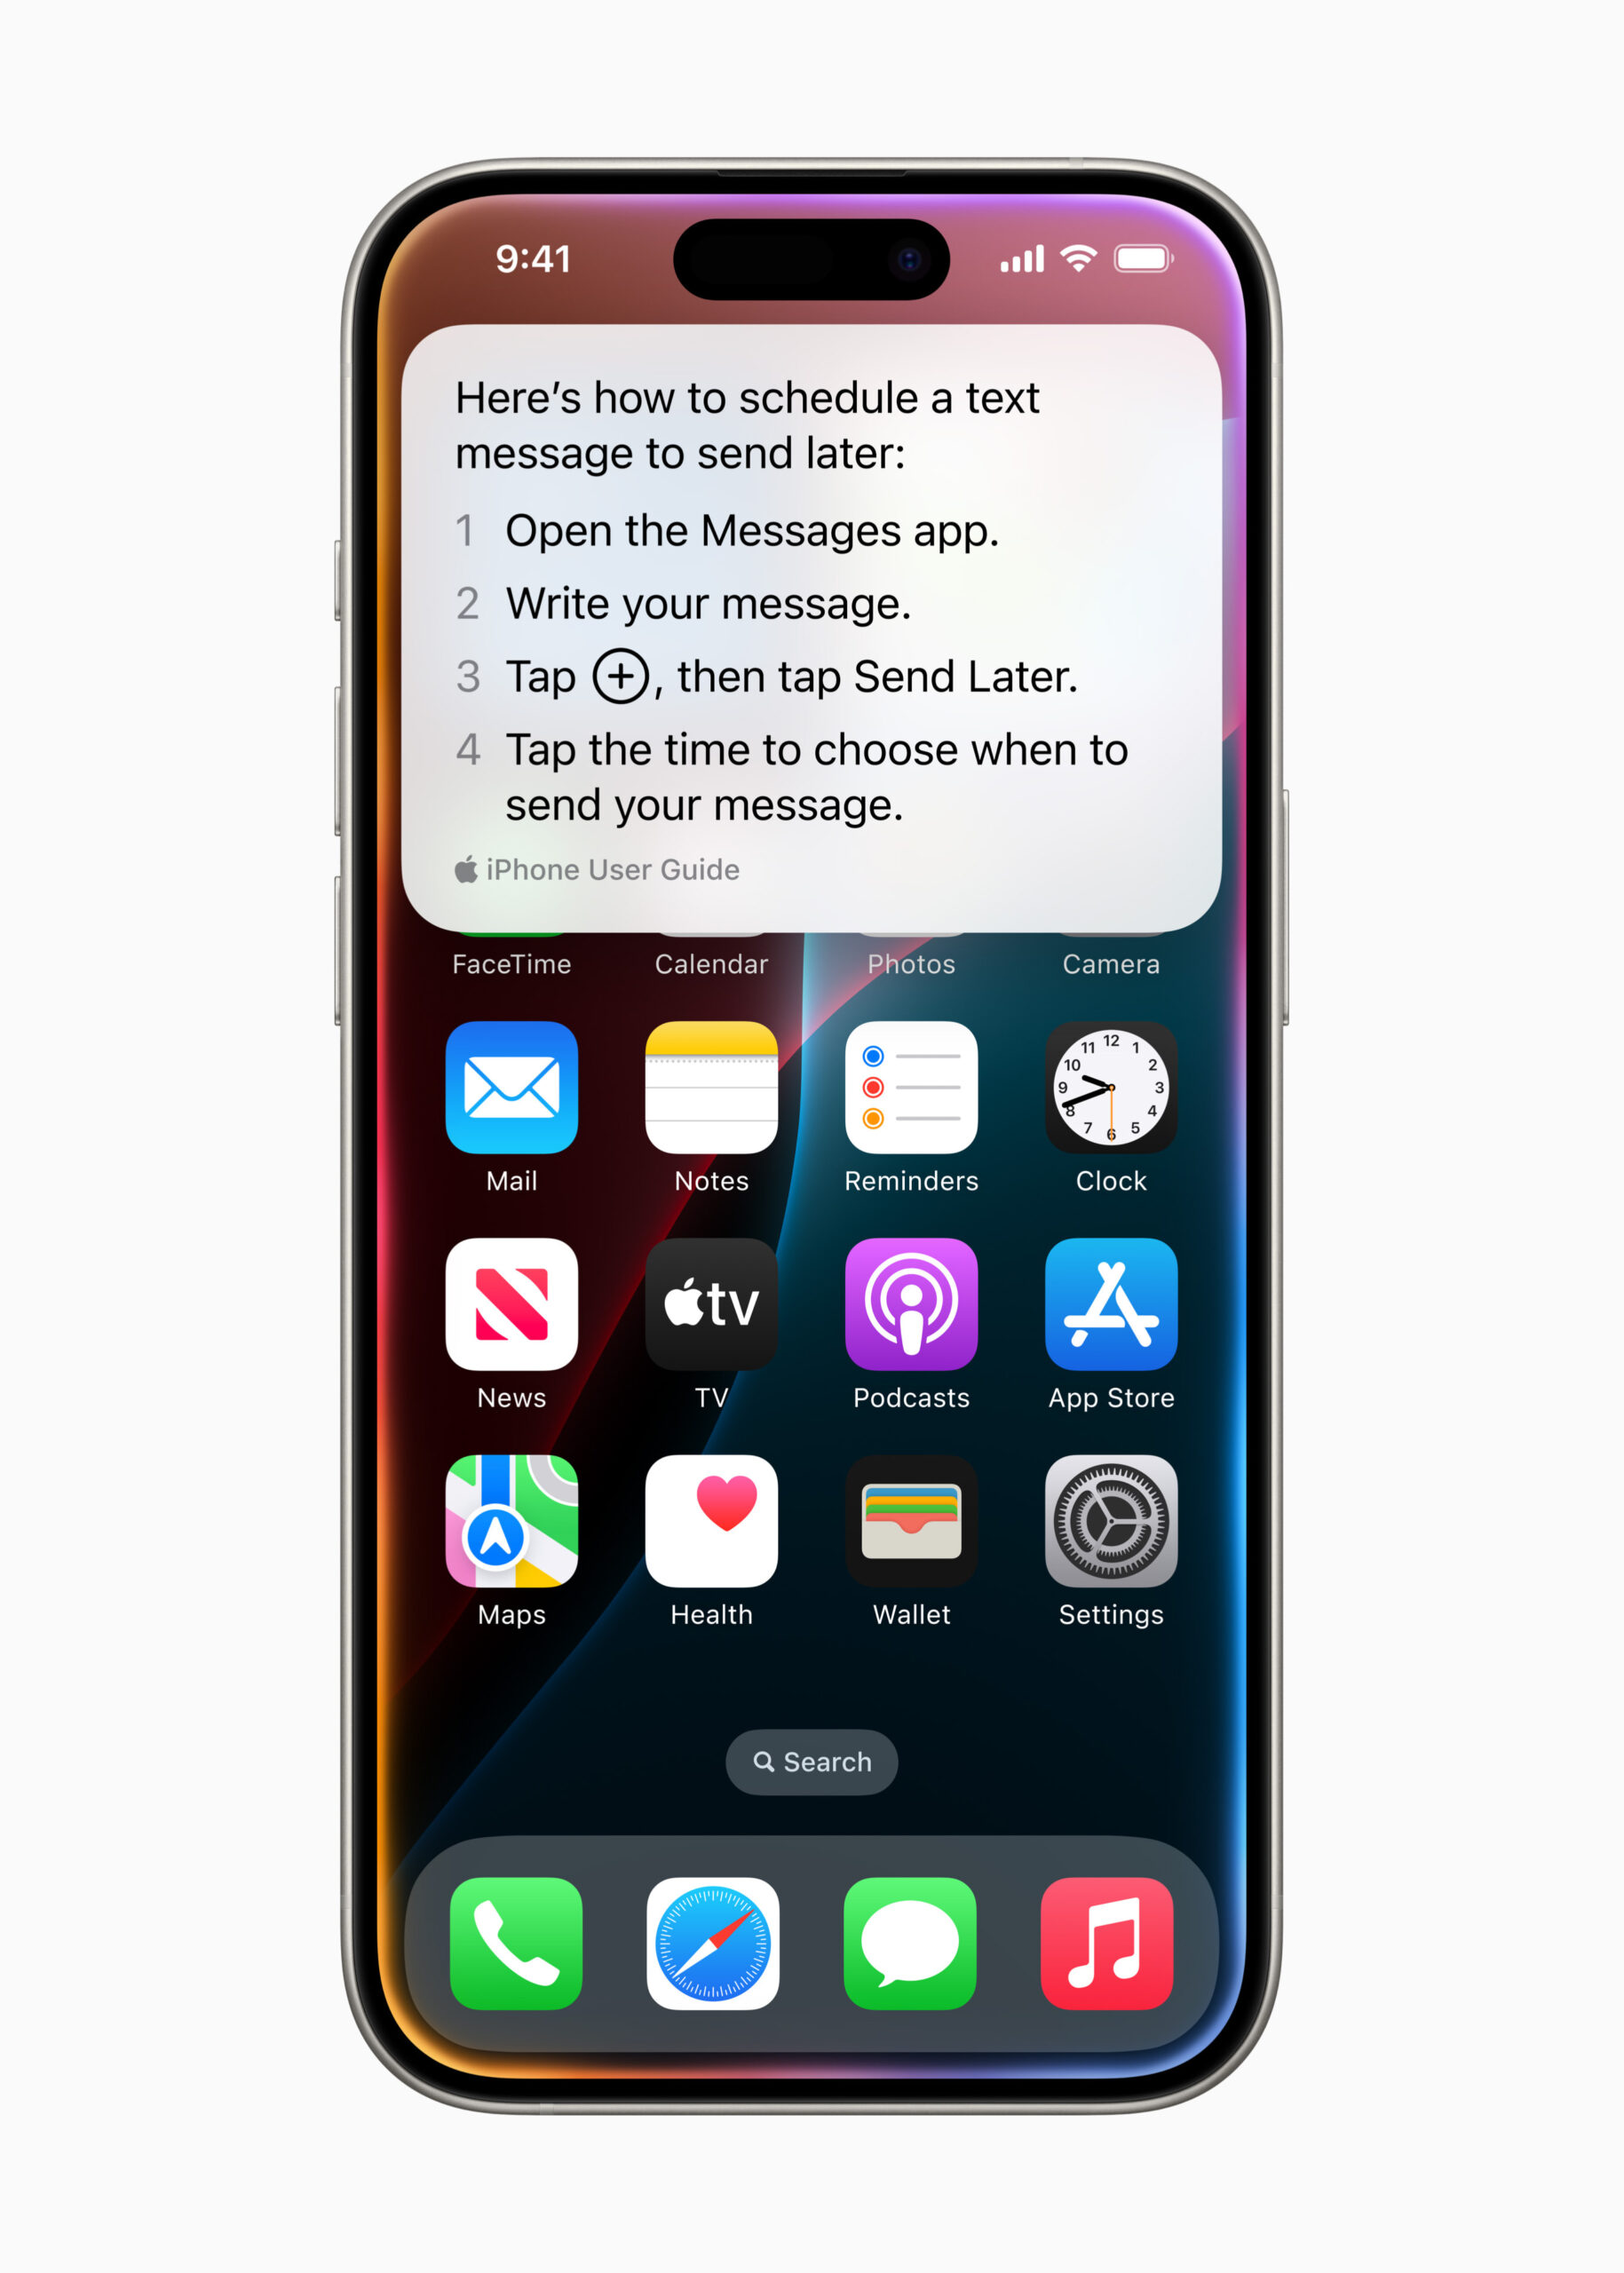 iPhone screen showing instructions on scheduling a text message using Apple Intelligence.